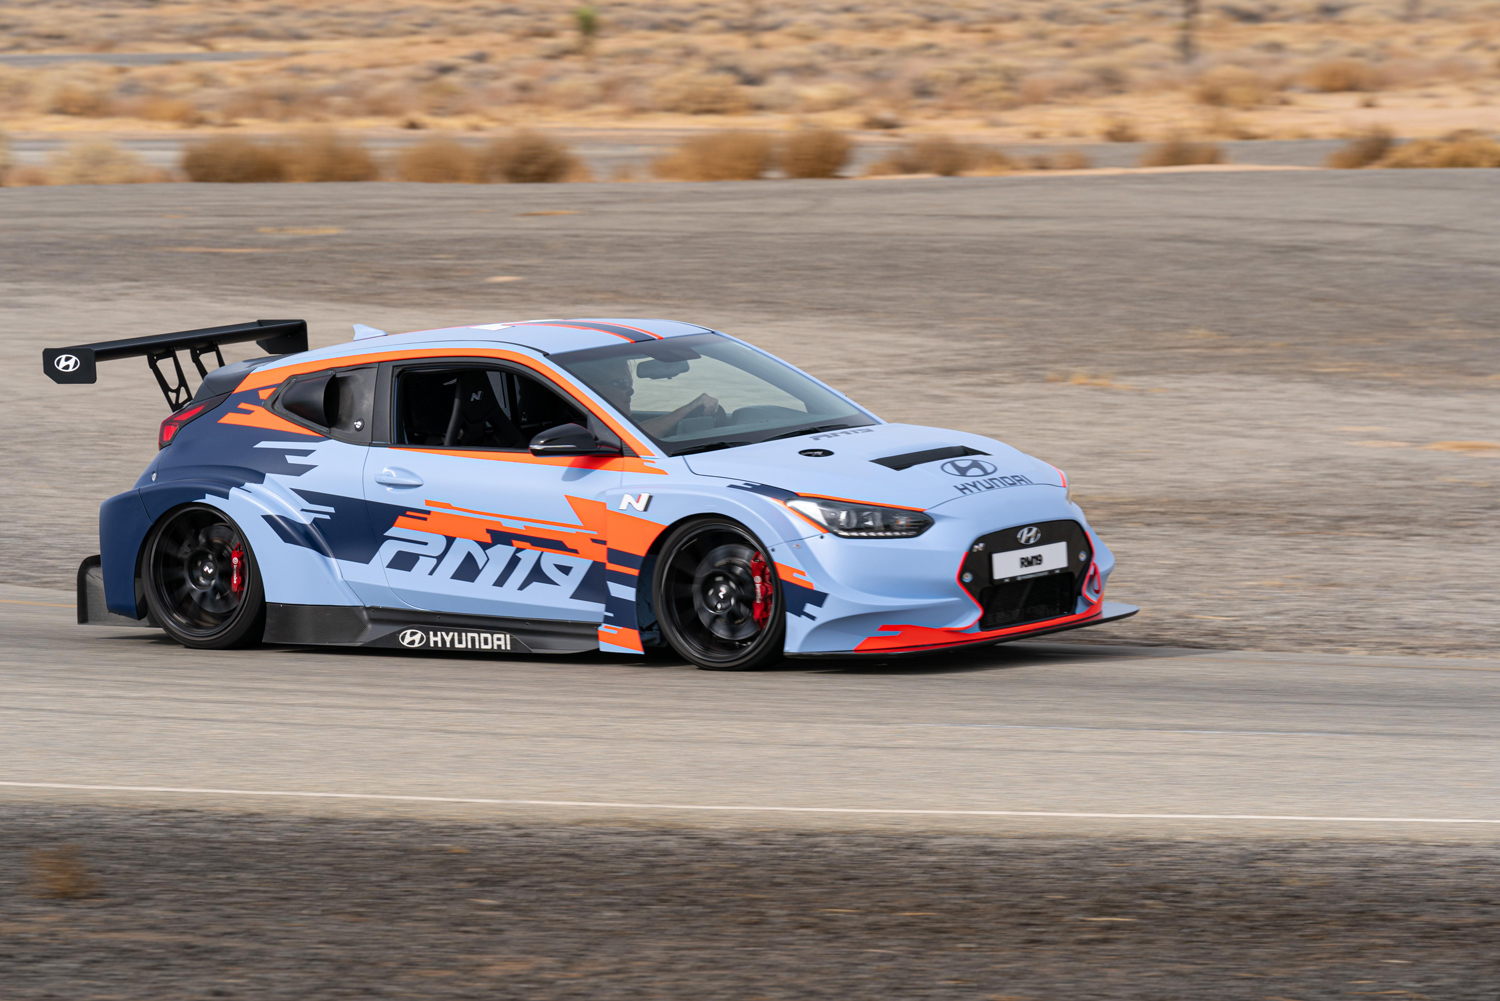 mid engined hyundai rm19 hot hatch unveiled at los angeles auto show 2